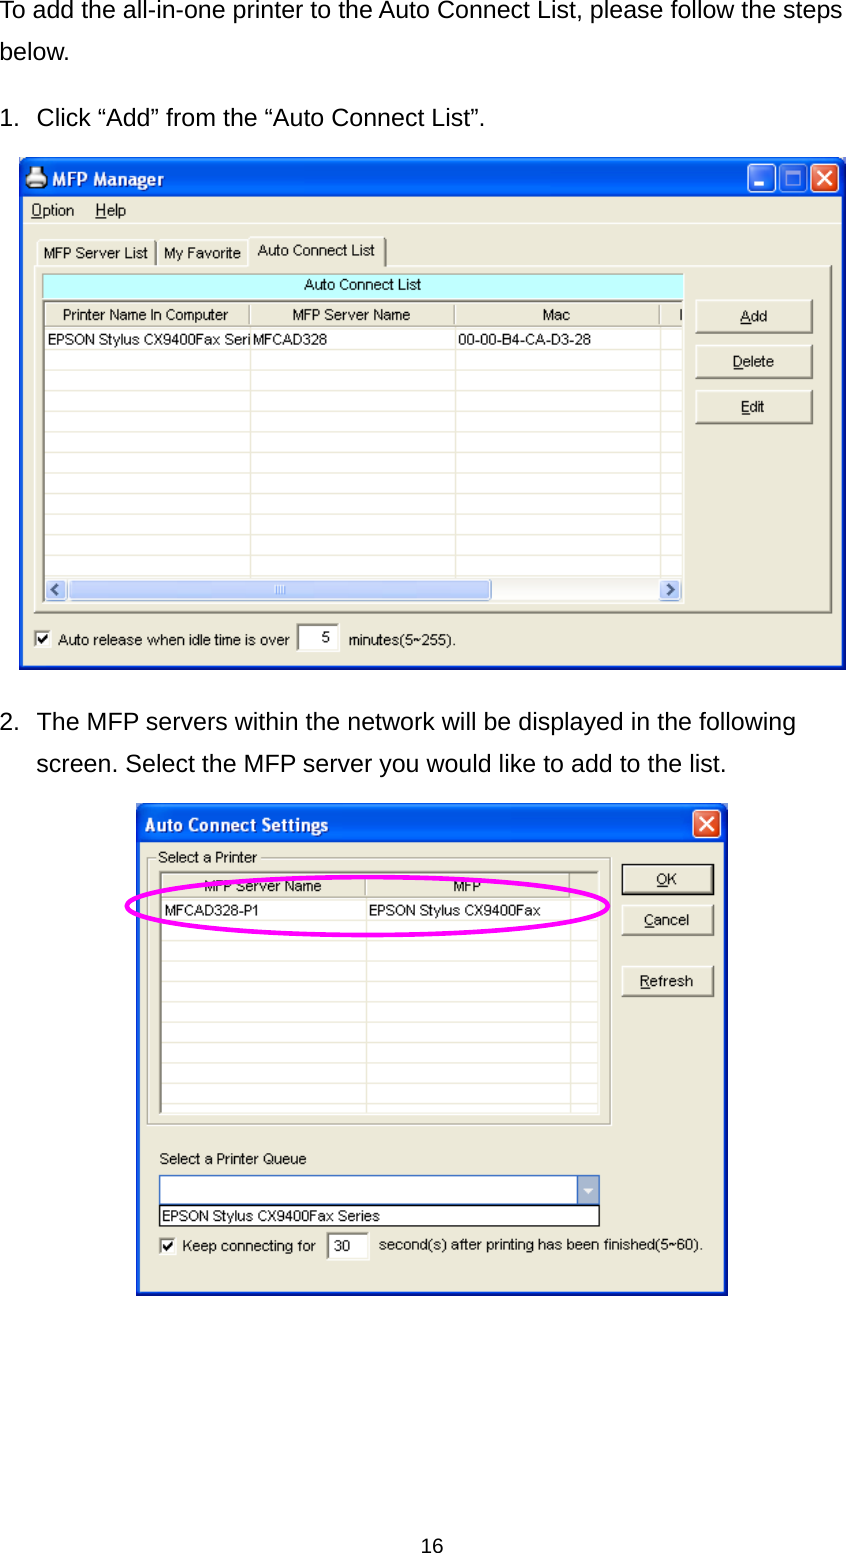 16 To add the all-in-one printer to the Auto Connect List, please follow the steps below. 1.  Click “Add” from the “Auto Connect List”.  2.  The MFP servers within the network will be displayed in the following screen. Select the MFP server you would like to add to the list.      